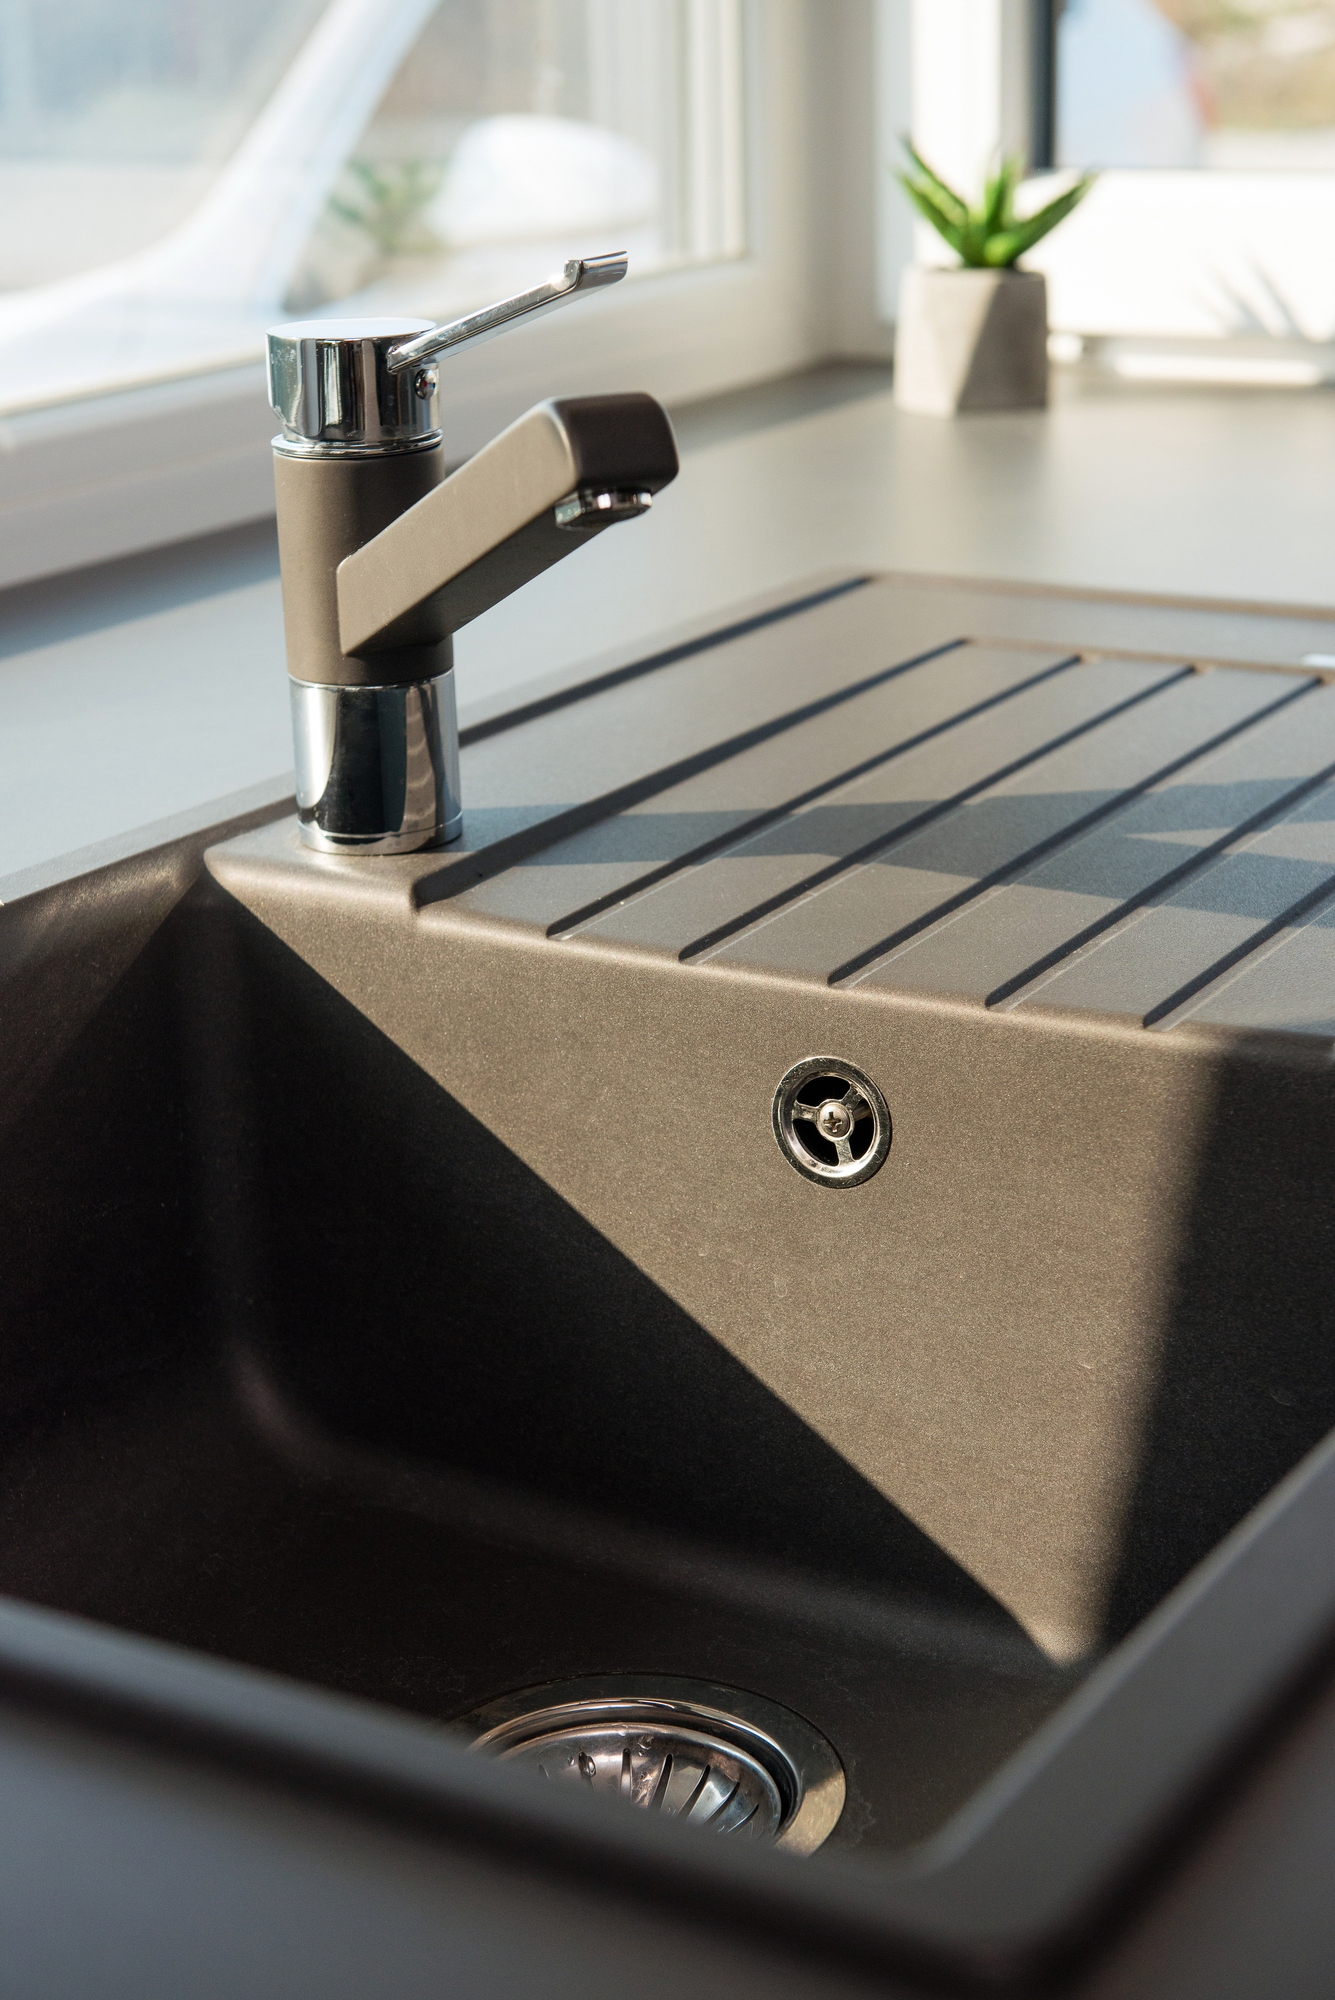 Detail of faucet and sink in contemporary kitchen